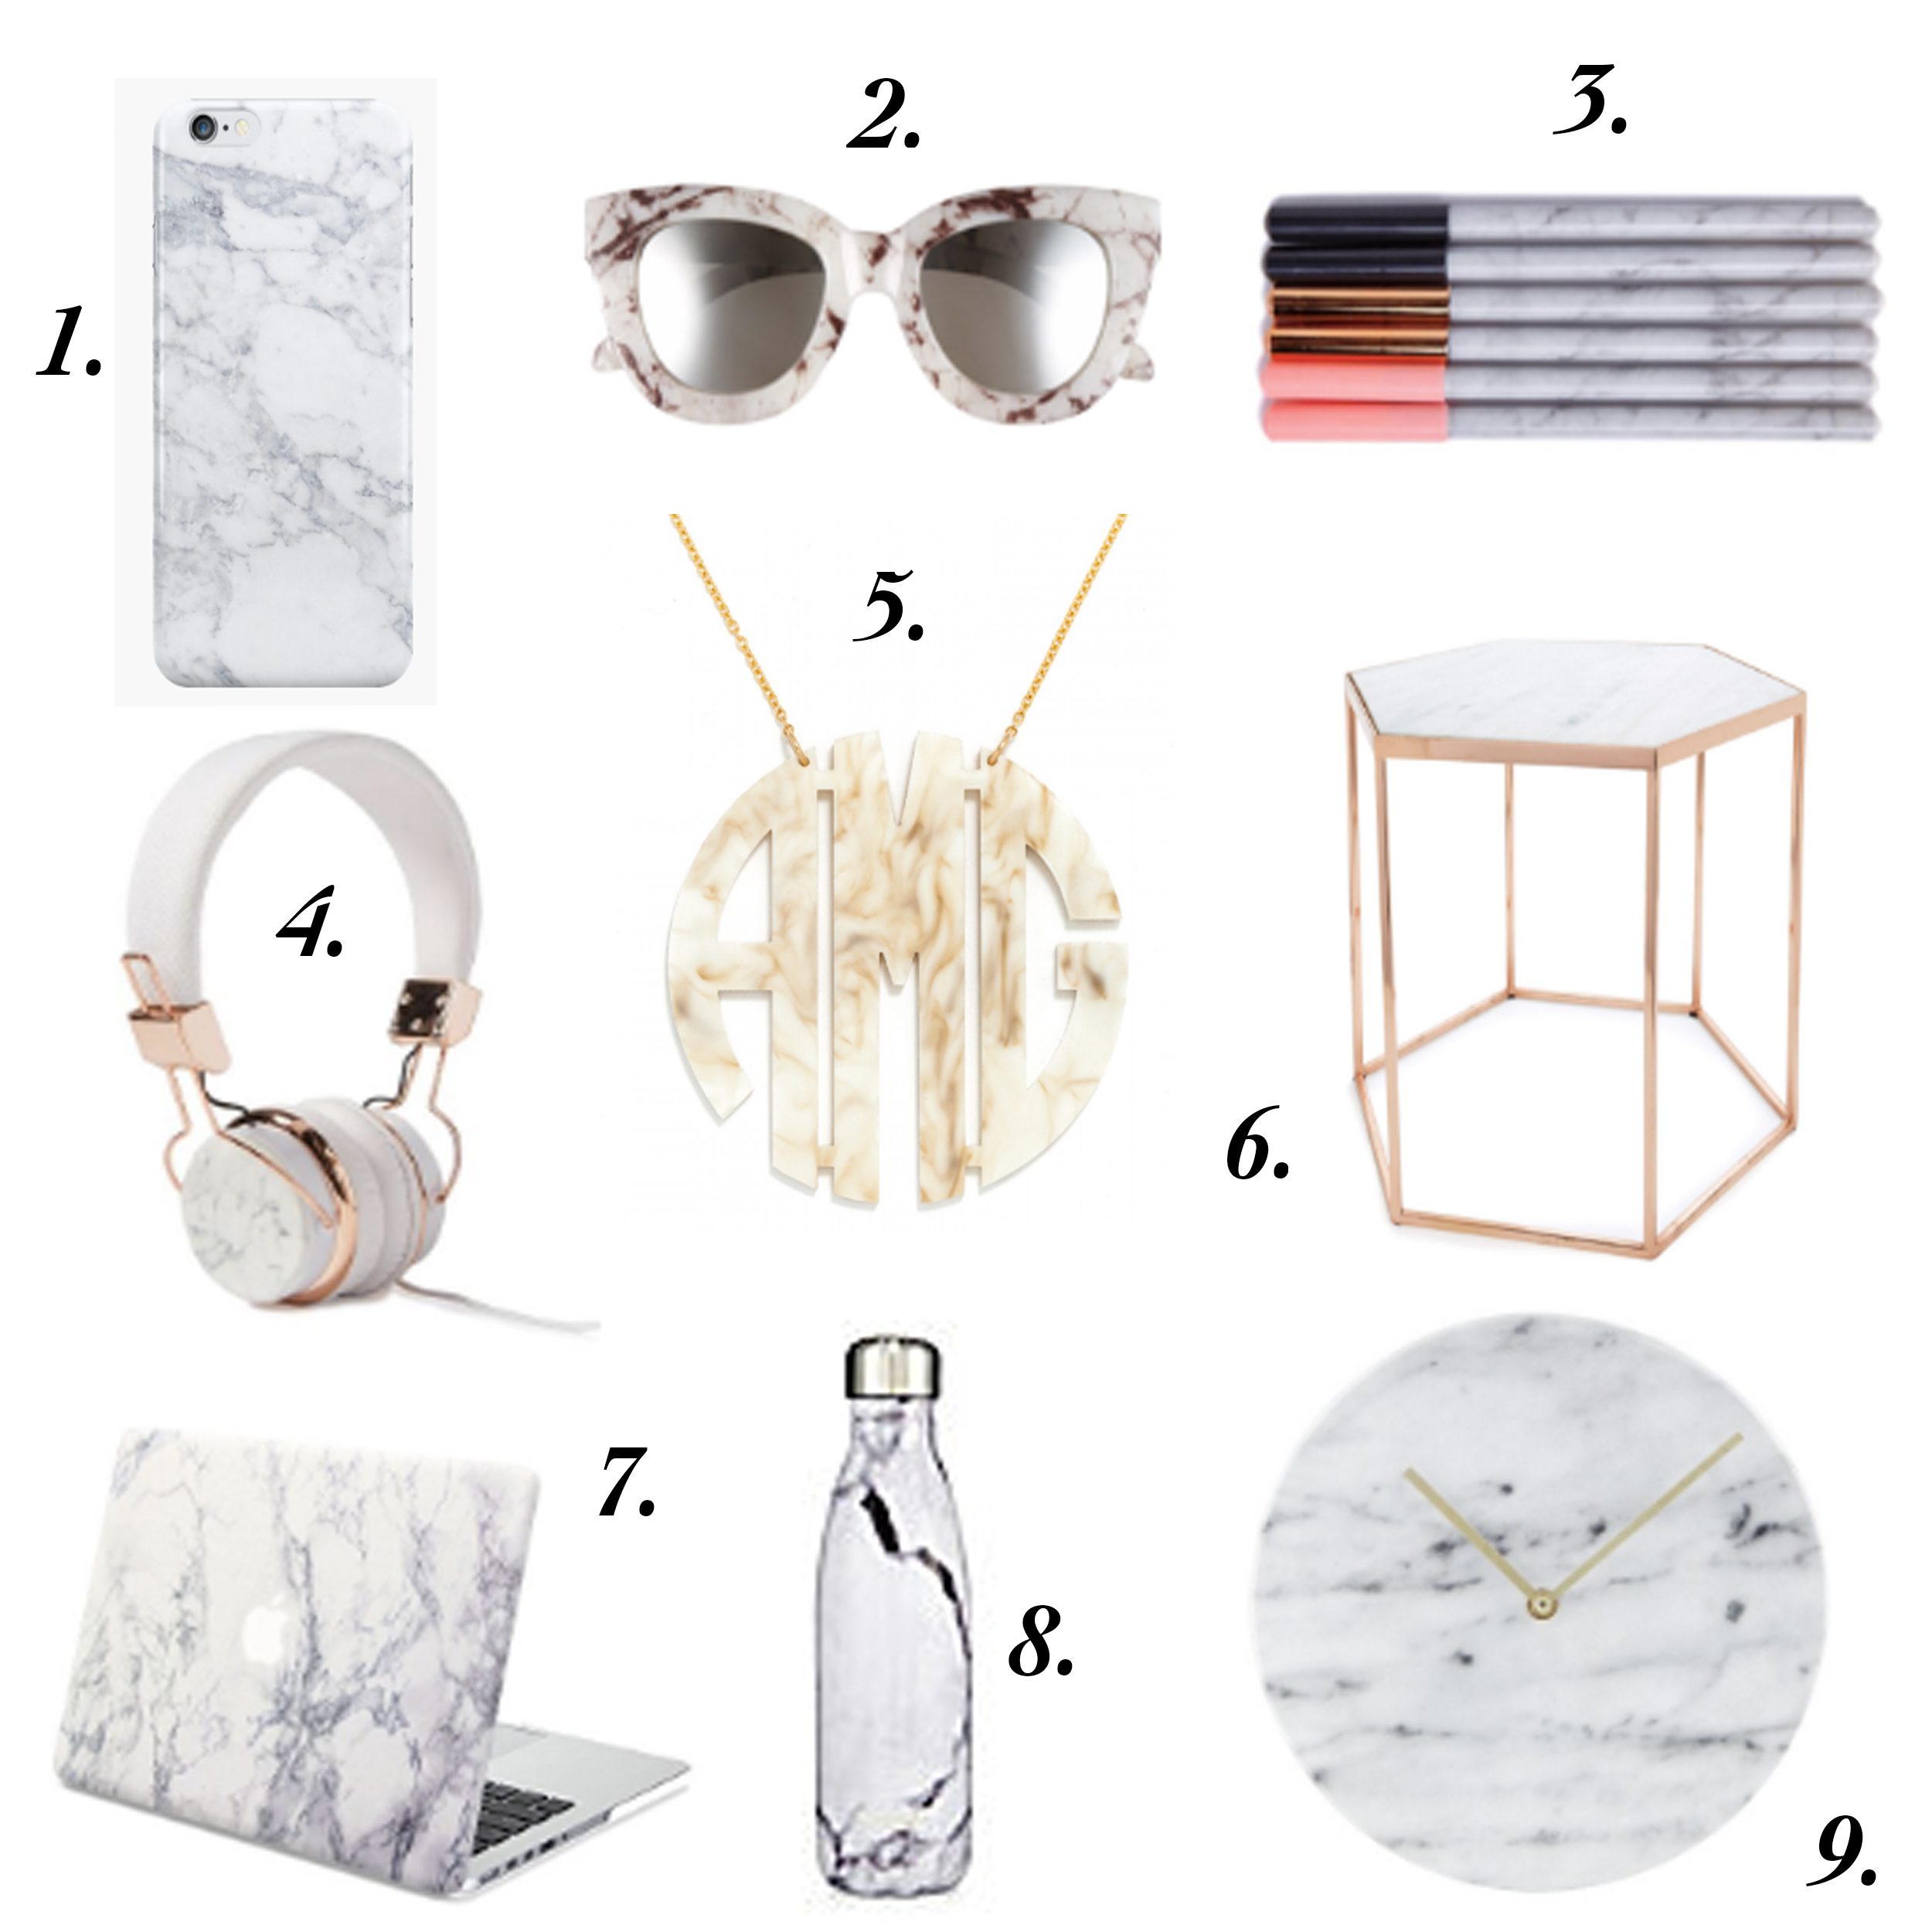 missyonmadison, marble, marblie iphone case, marble laptop case, marble macbook case, marble home decor, marble decor, marble accessories, marble blanket, marble pillow, marble sunglasses, le specs, marble le specs sunglasses, baublebar, acrylic monogram necklace, marble monogram necklace, marble water bottle, marble pens, marble notebook, marble clock, target, target home, marble headphones, la blogger, interior inspo, home decor,